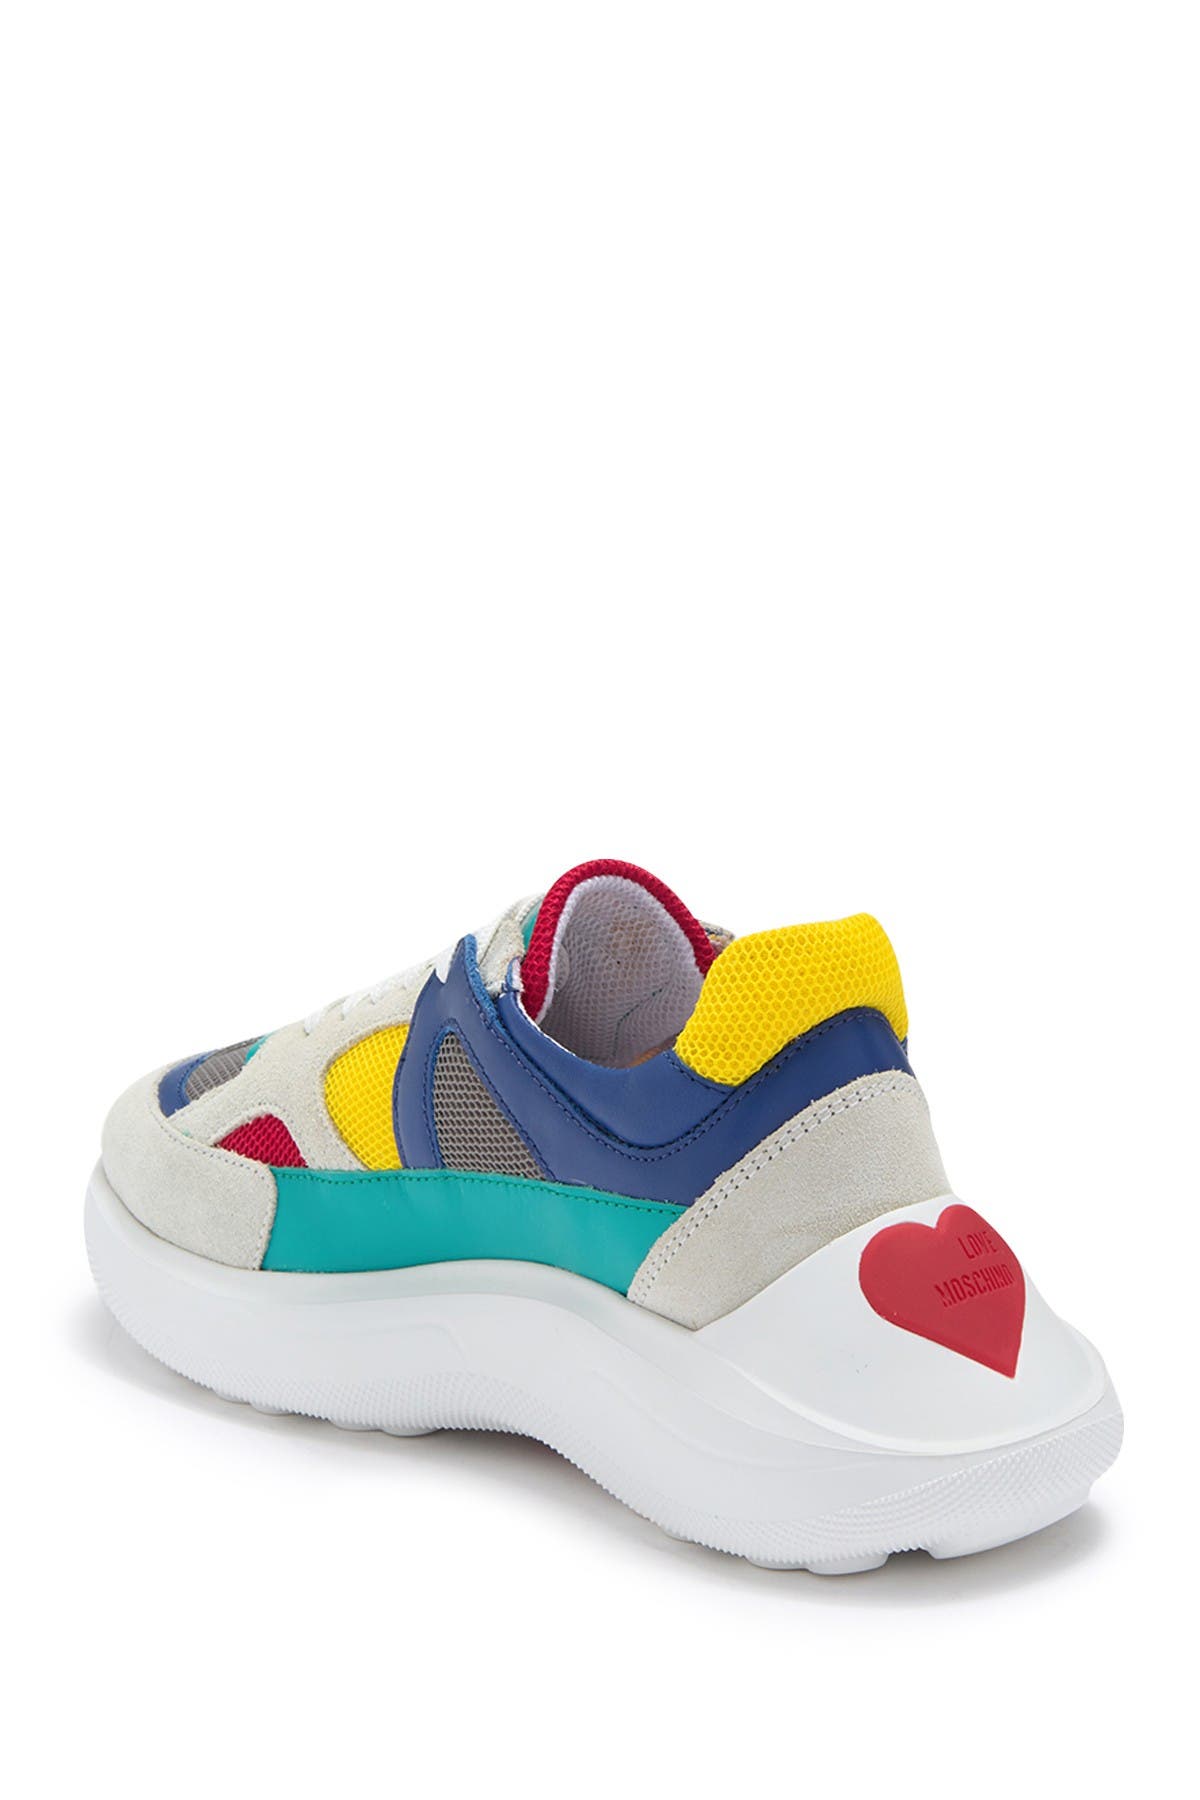 LOVE Moschino | Chunky Colorblock Sneaker | Nordstrom Rack